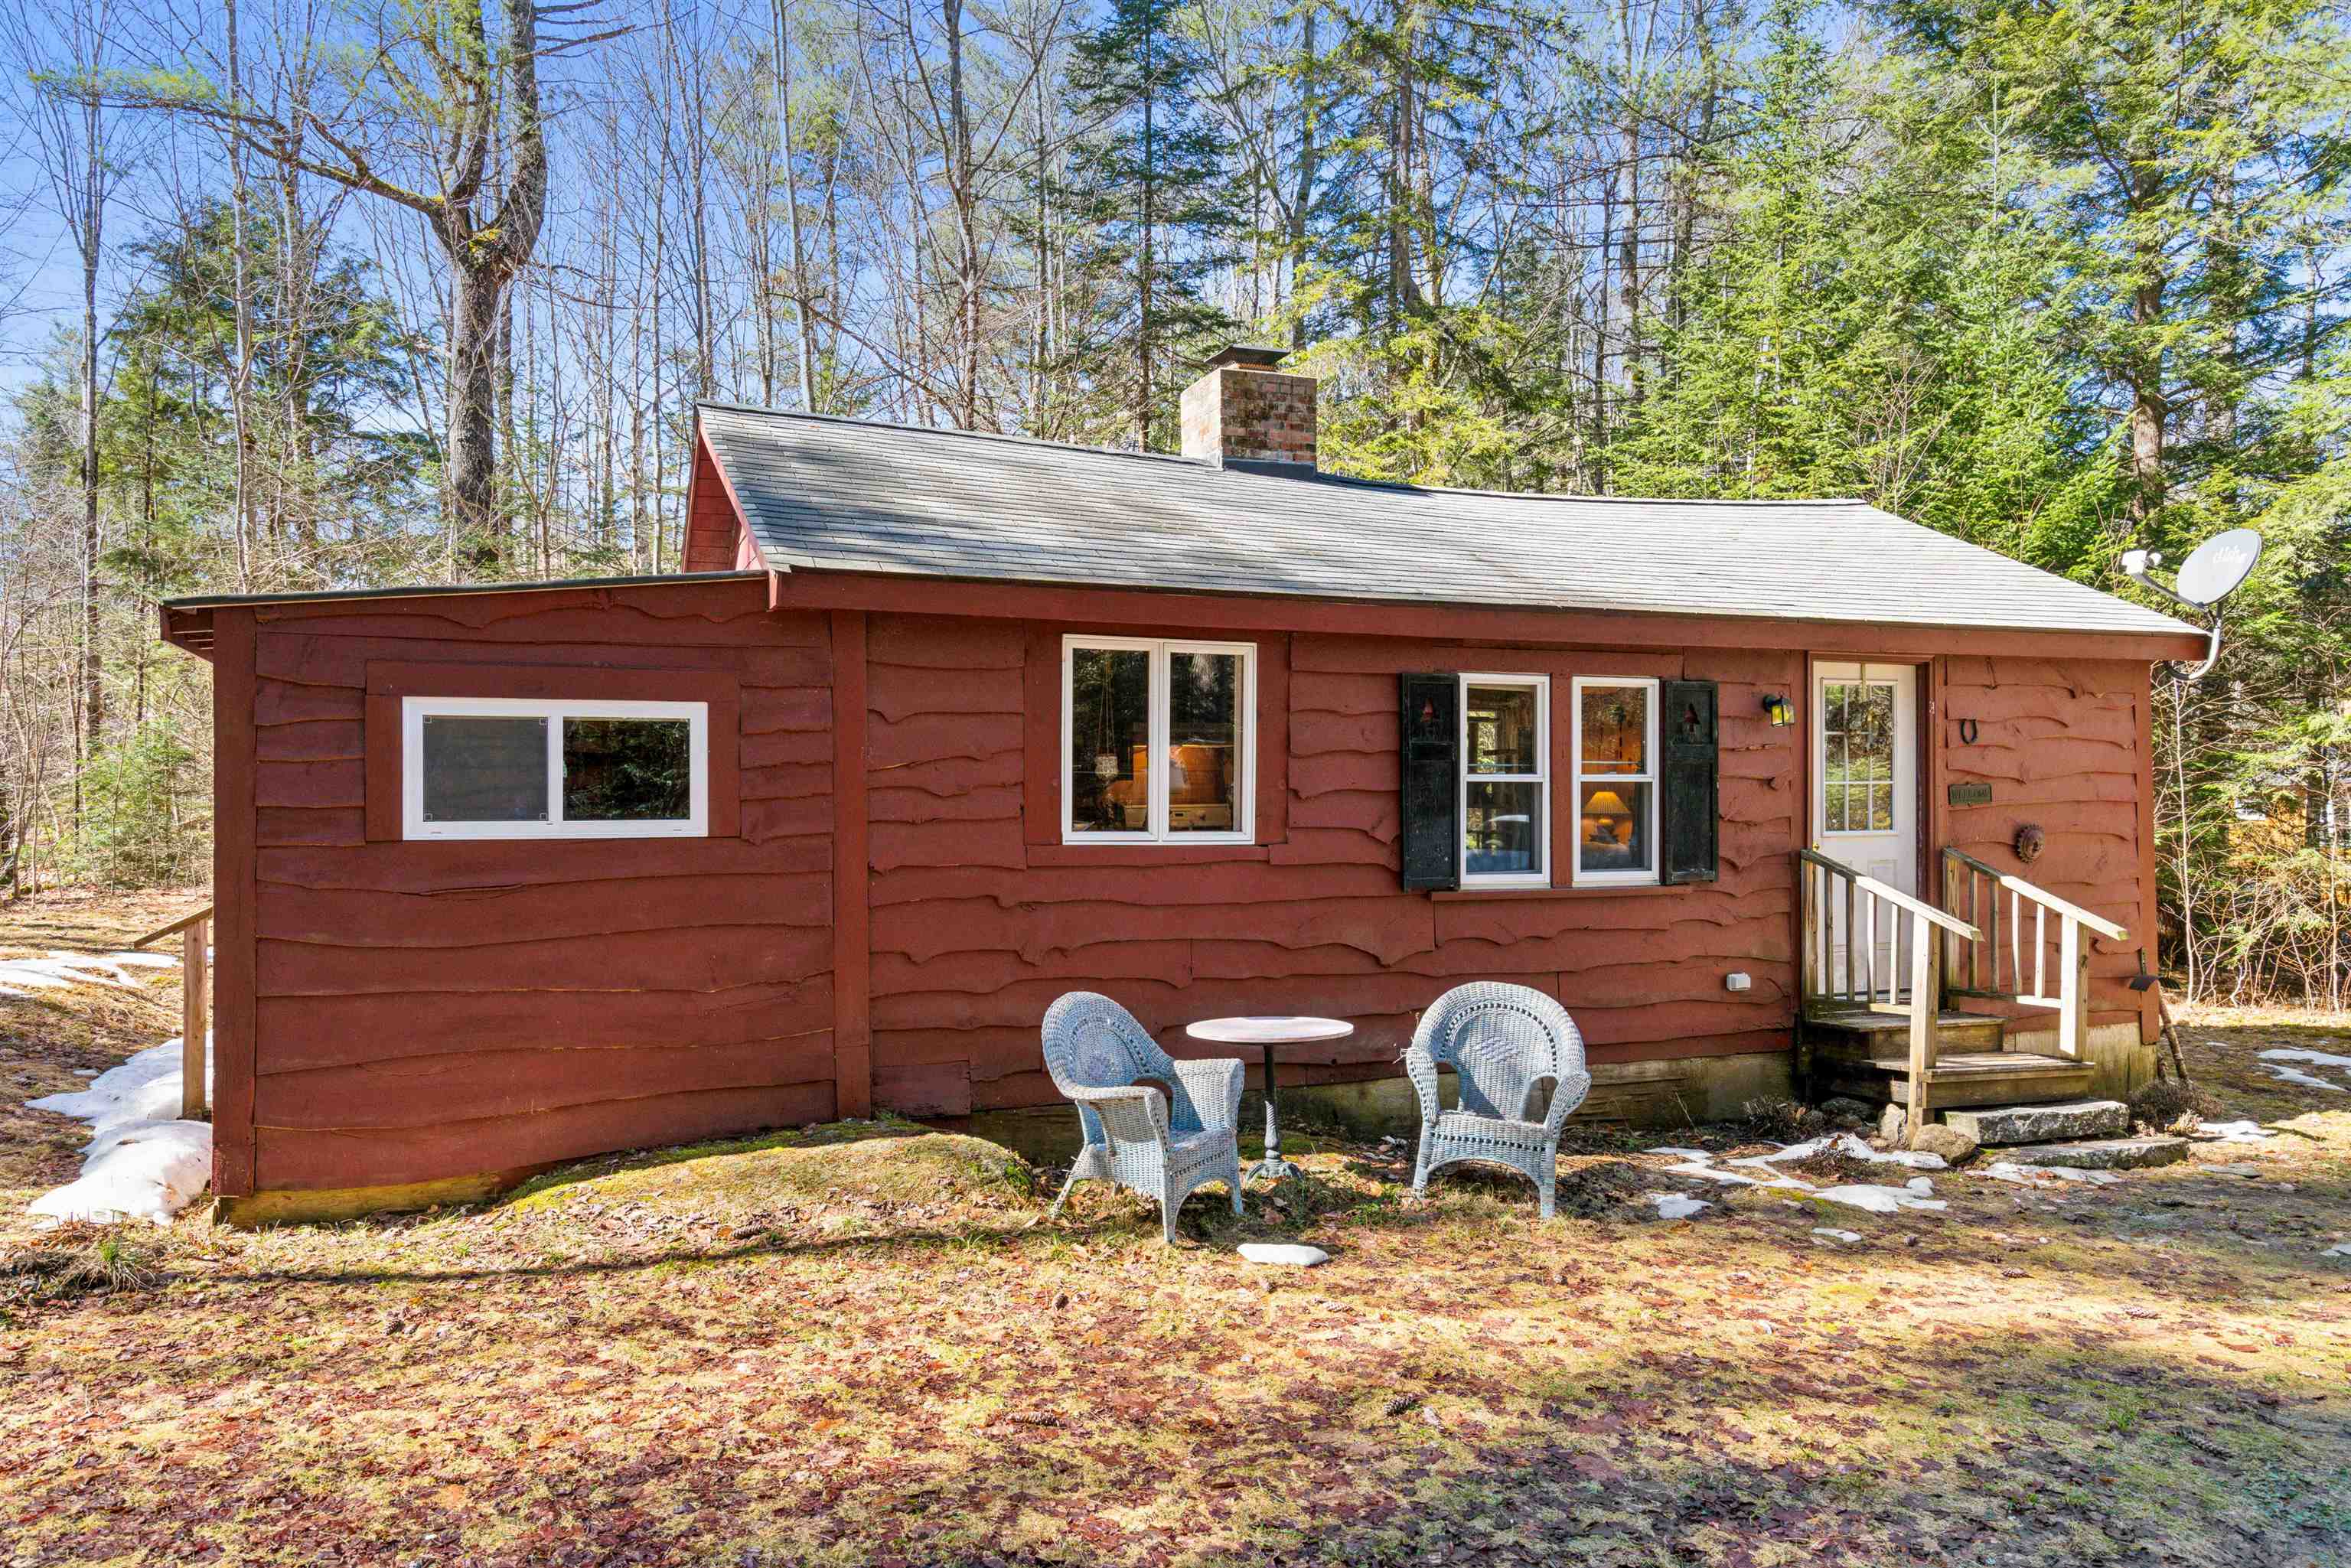 1.25 Story Single Family Home in Sunapee NH